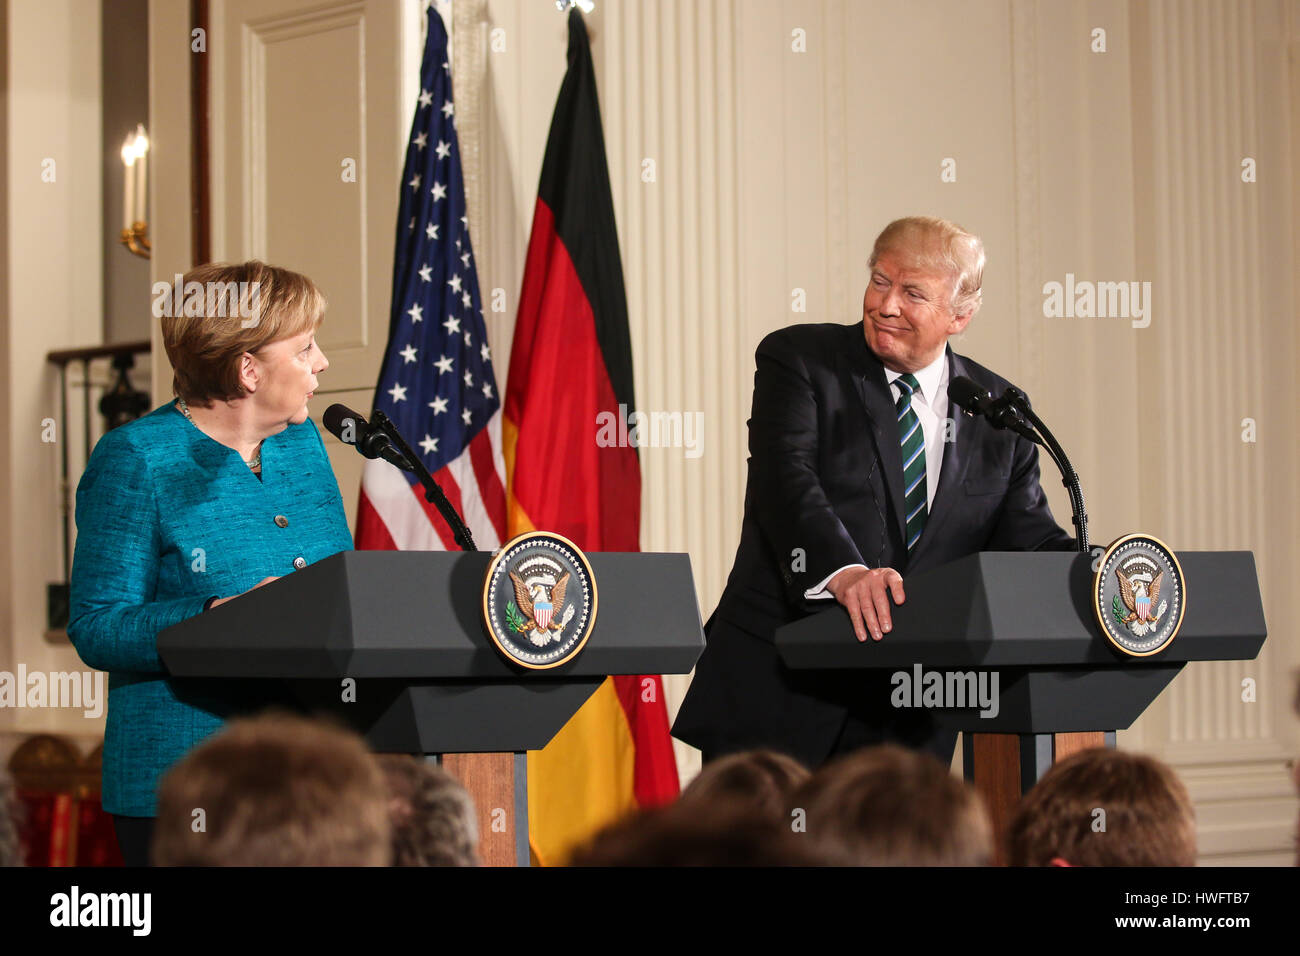 German Chancellor Angela Merkel visits Washington, D.C. on Friday, March 17, 2017 and meets with U.S. President Donald Trump at the White House. The two world leaders held a joint press conference in the White House's East Room. Stock Photo